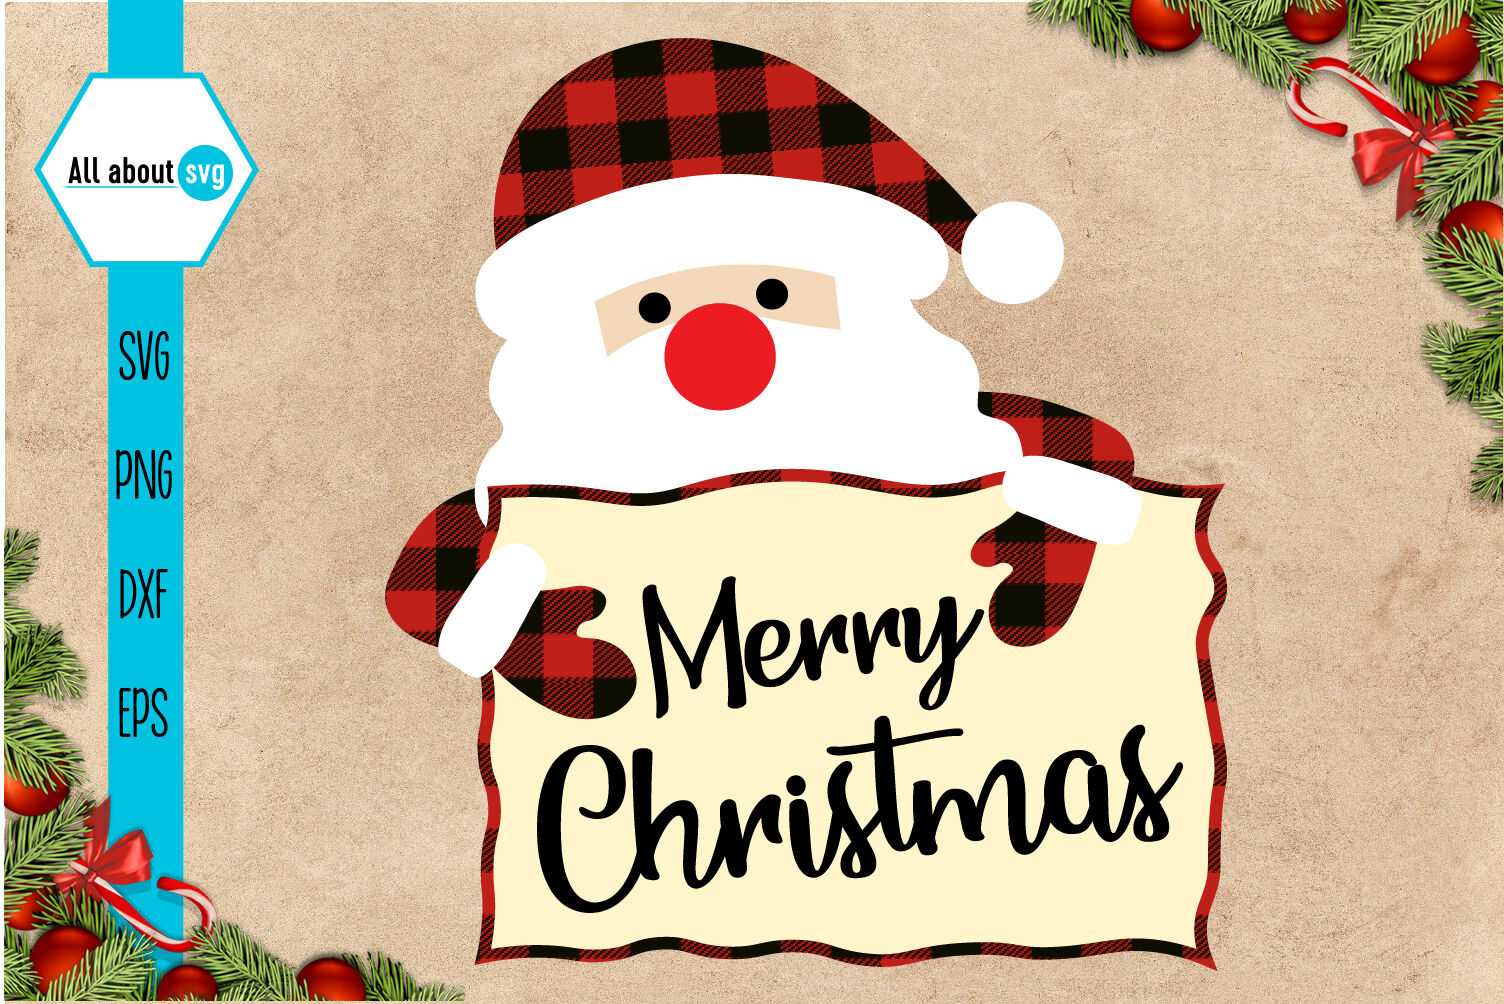 Santa Claus Merry Christmas Svg By All About Svg Thehungryjpeg Com